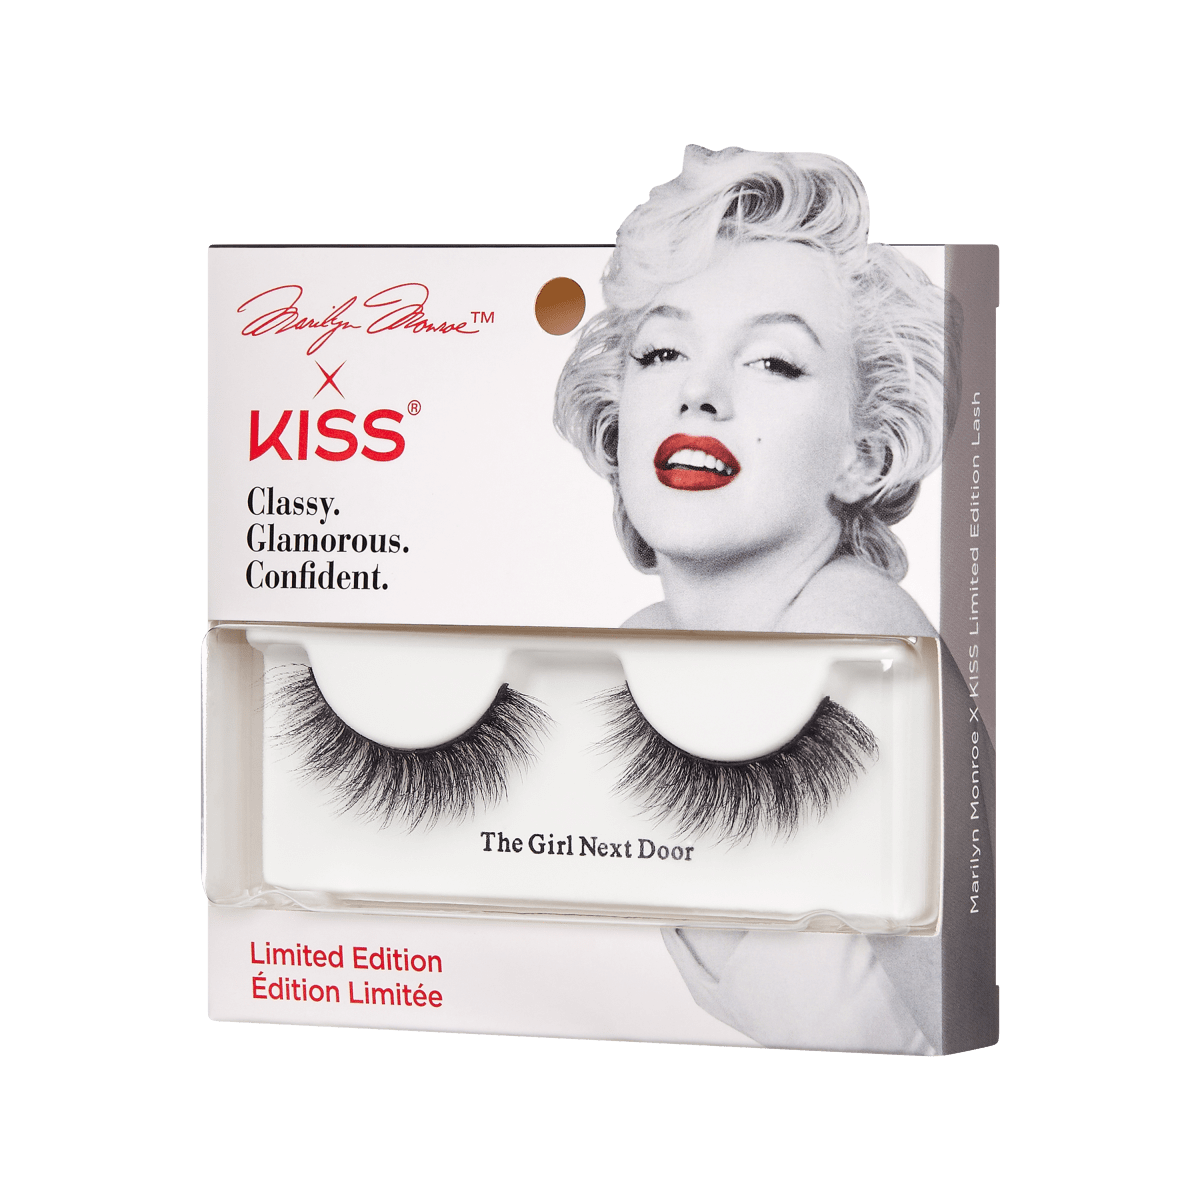 Marilyn Monroe x KISS Limited Edition Lashes - The Girl Next Door